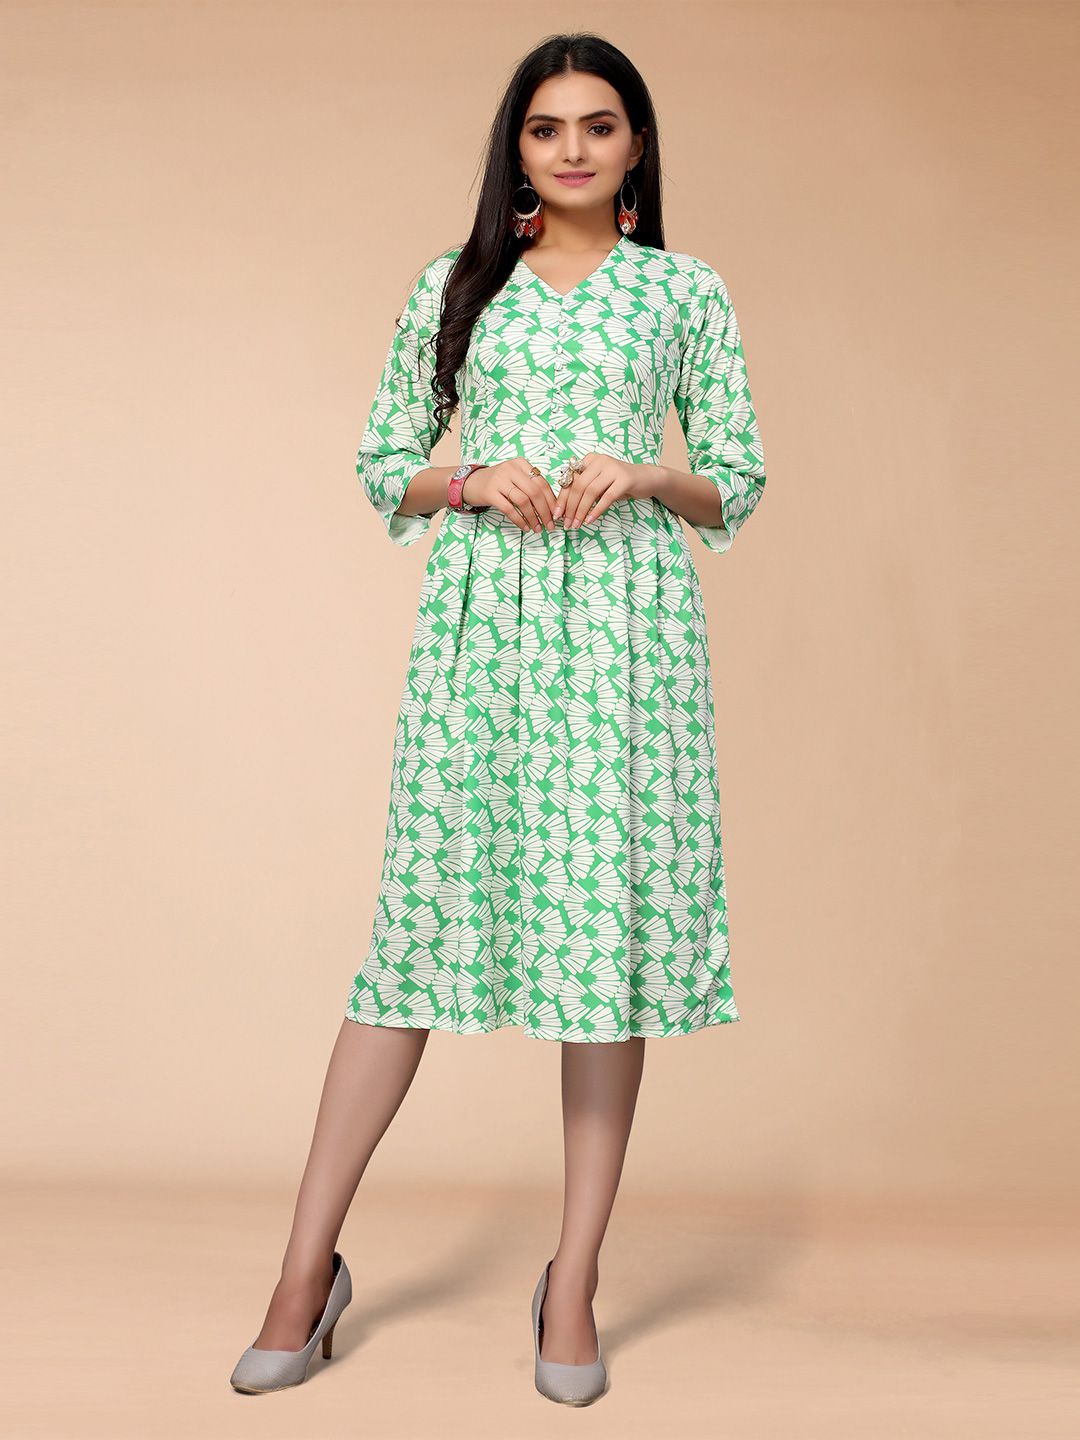 KALINI Green Floral Crepe A-Line Dress Price in India